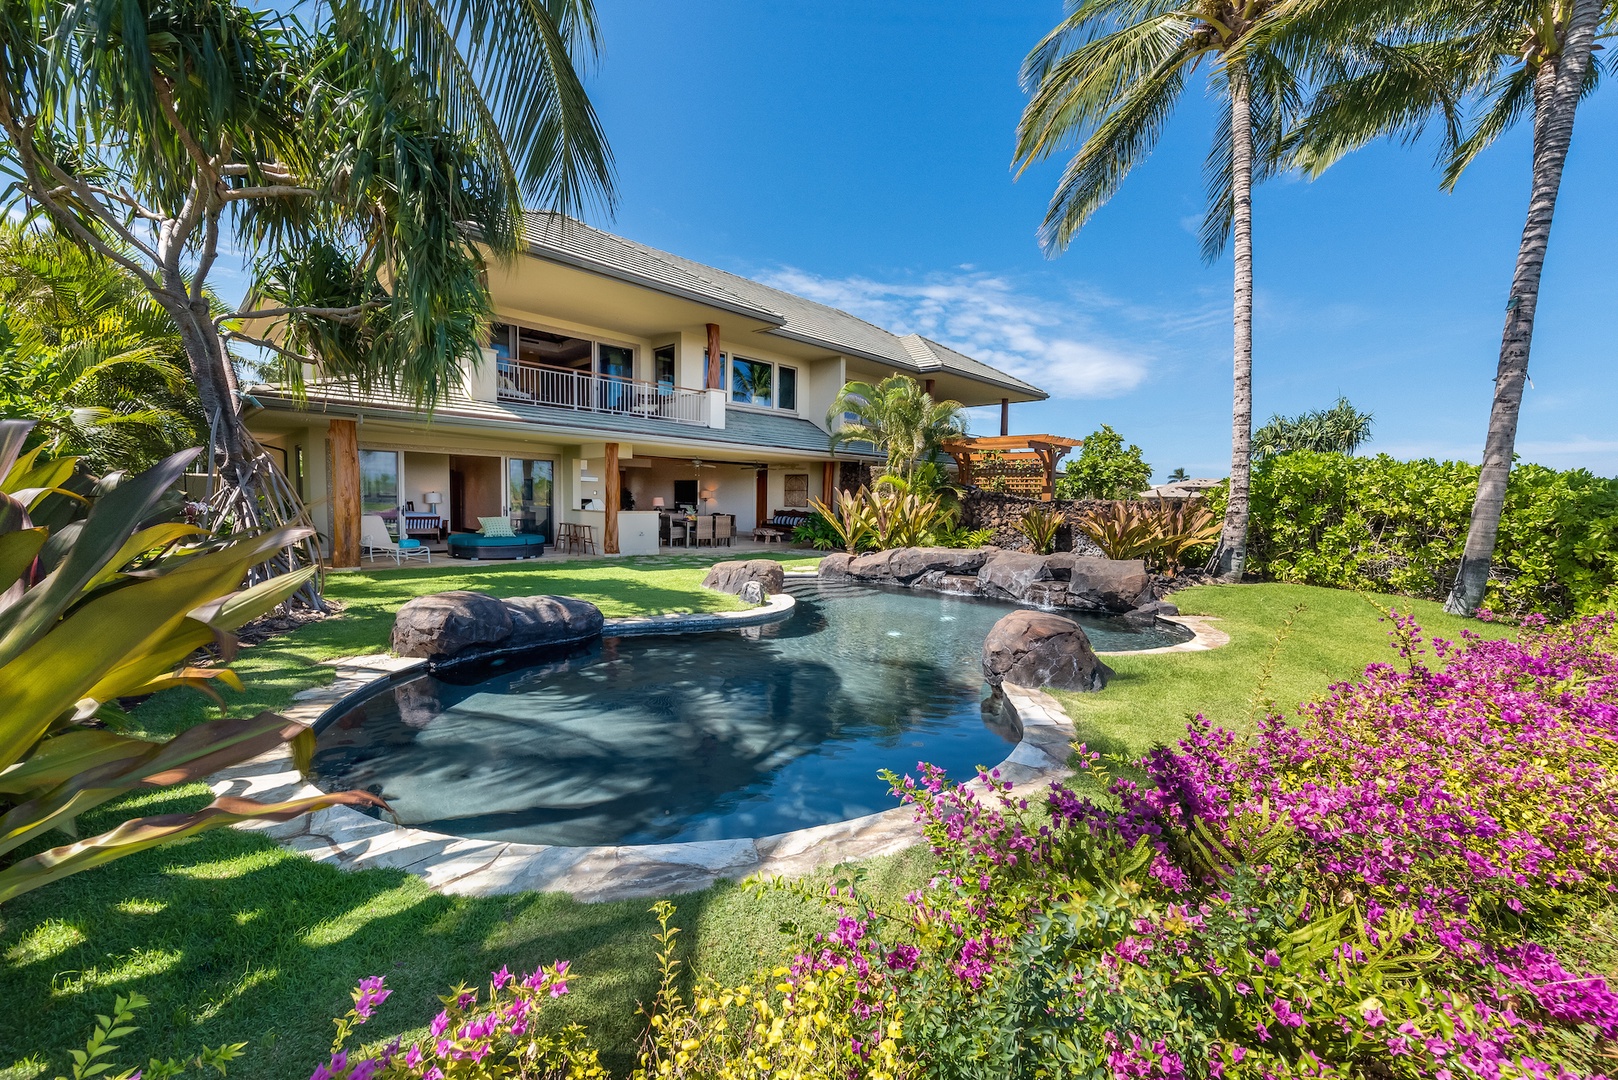 Kamuela Vacation Rentals, 3BD OneOcean (1C) at Mauna Lani Resort - Free-form Pool and Lush Landscaping Provide a Peaceful Retreat to Spend the Day